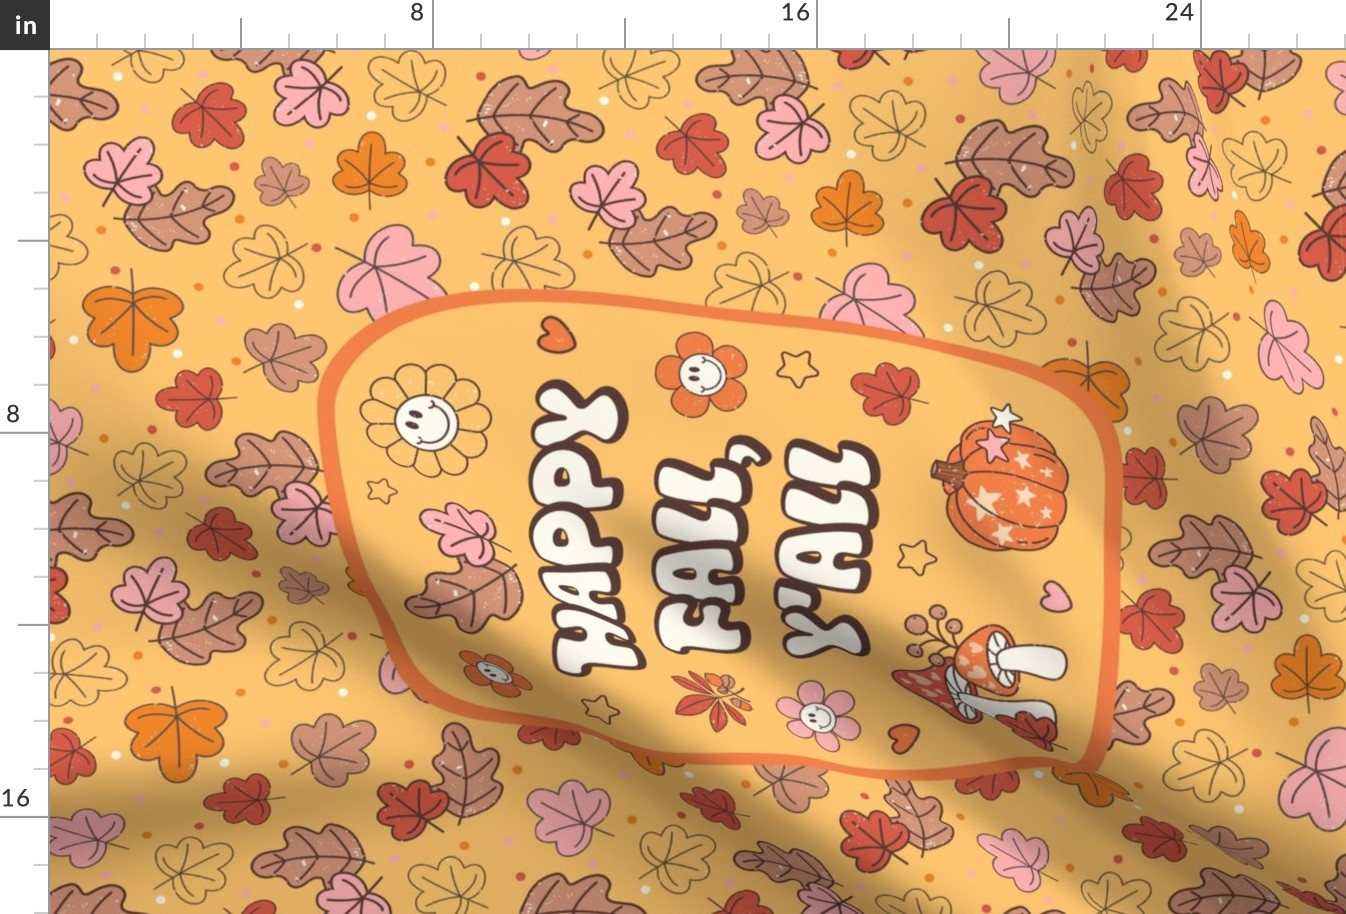  Large 27x18 Fat Quarter Panel Happy Fall, Y'all Groovy Autumn on Butternut Yellow for Wall Hanging or Tea Towel